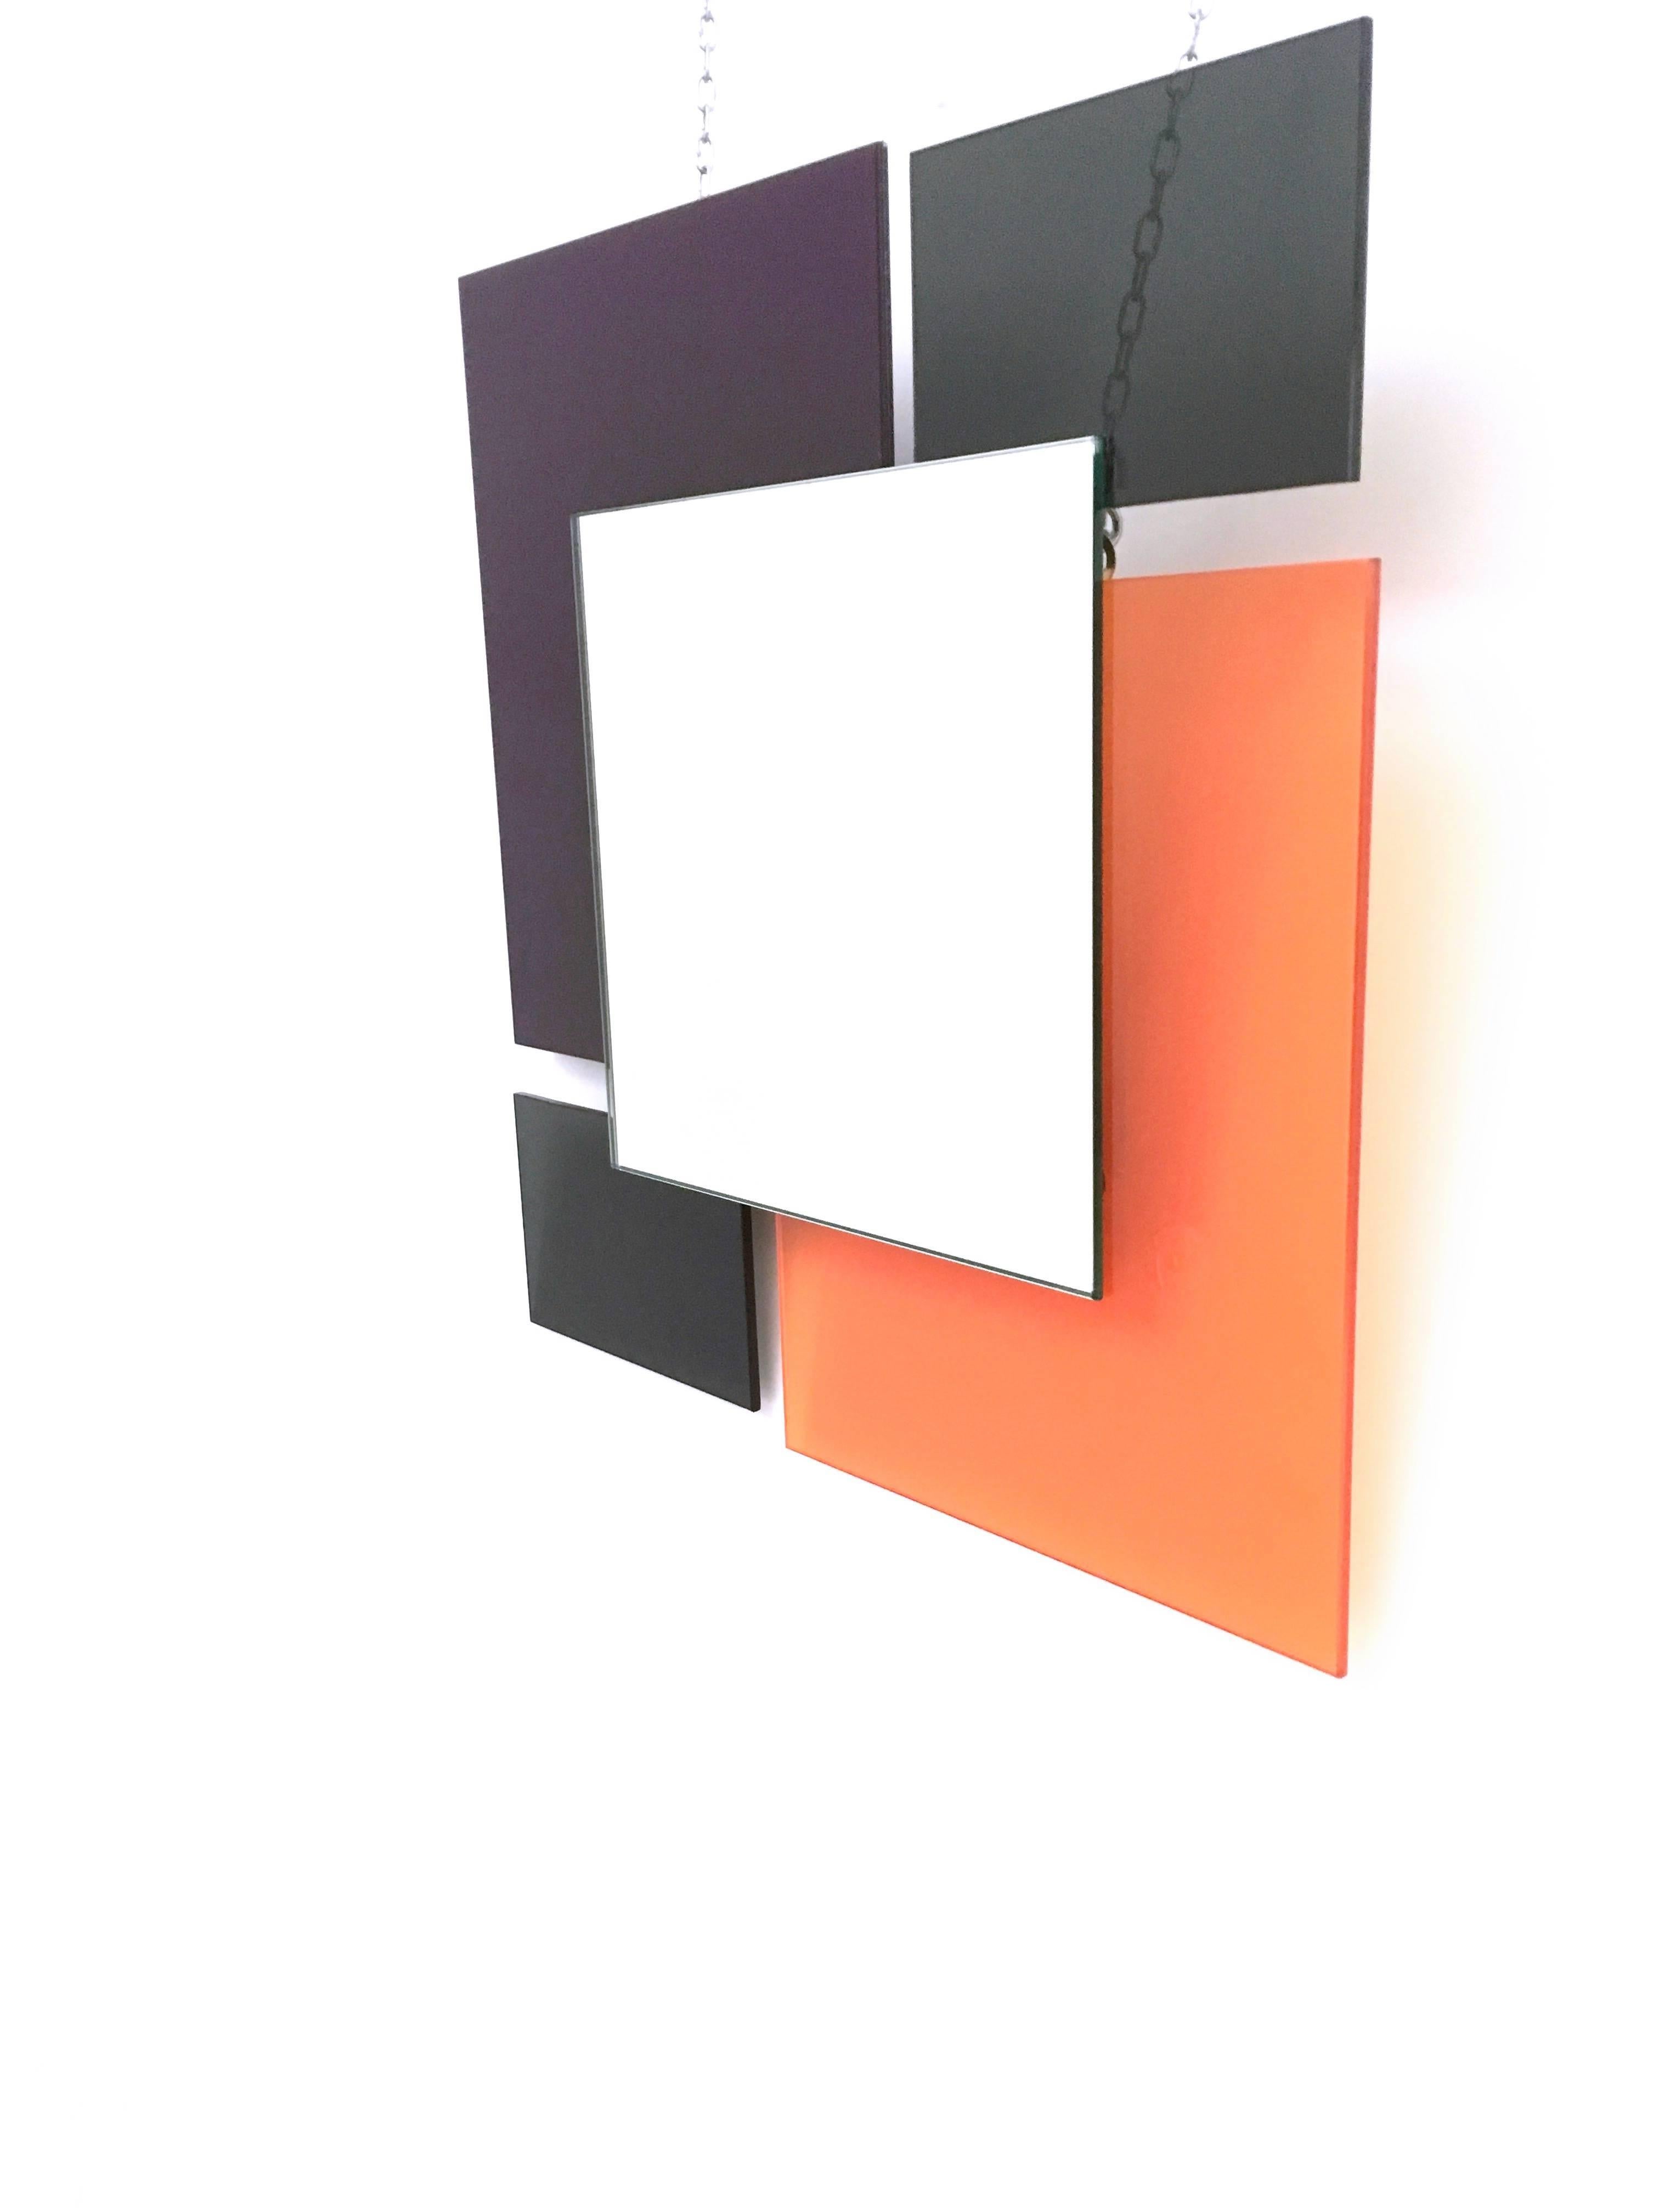 Pair of Postmodern Black and Orange Wall Mirrors in the Style of Sottsass, 1980s For Sale 3